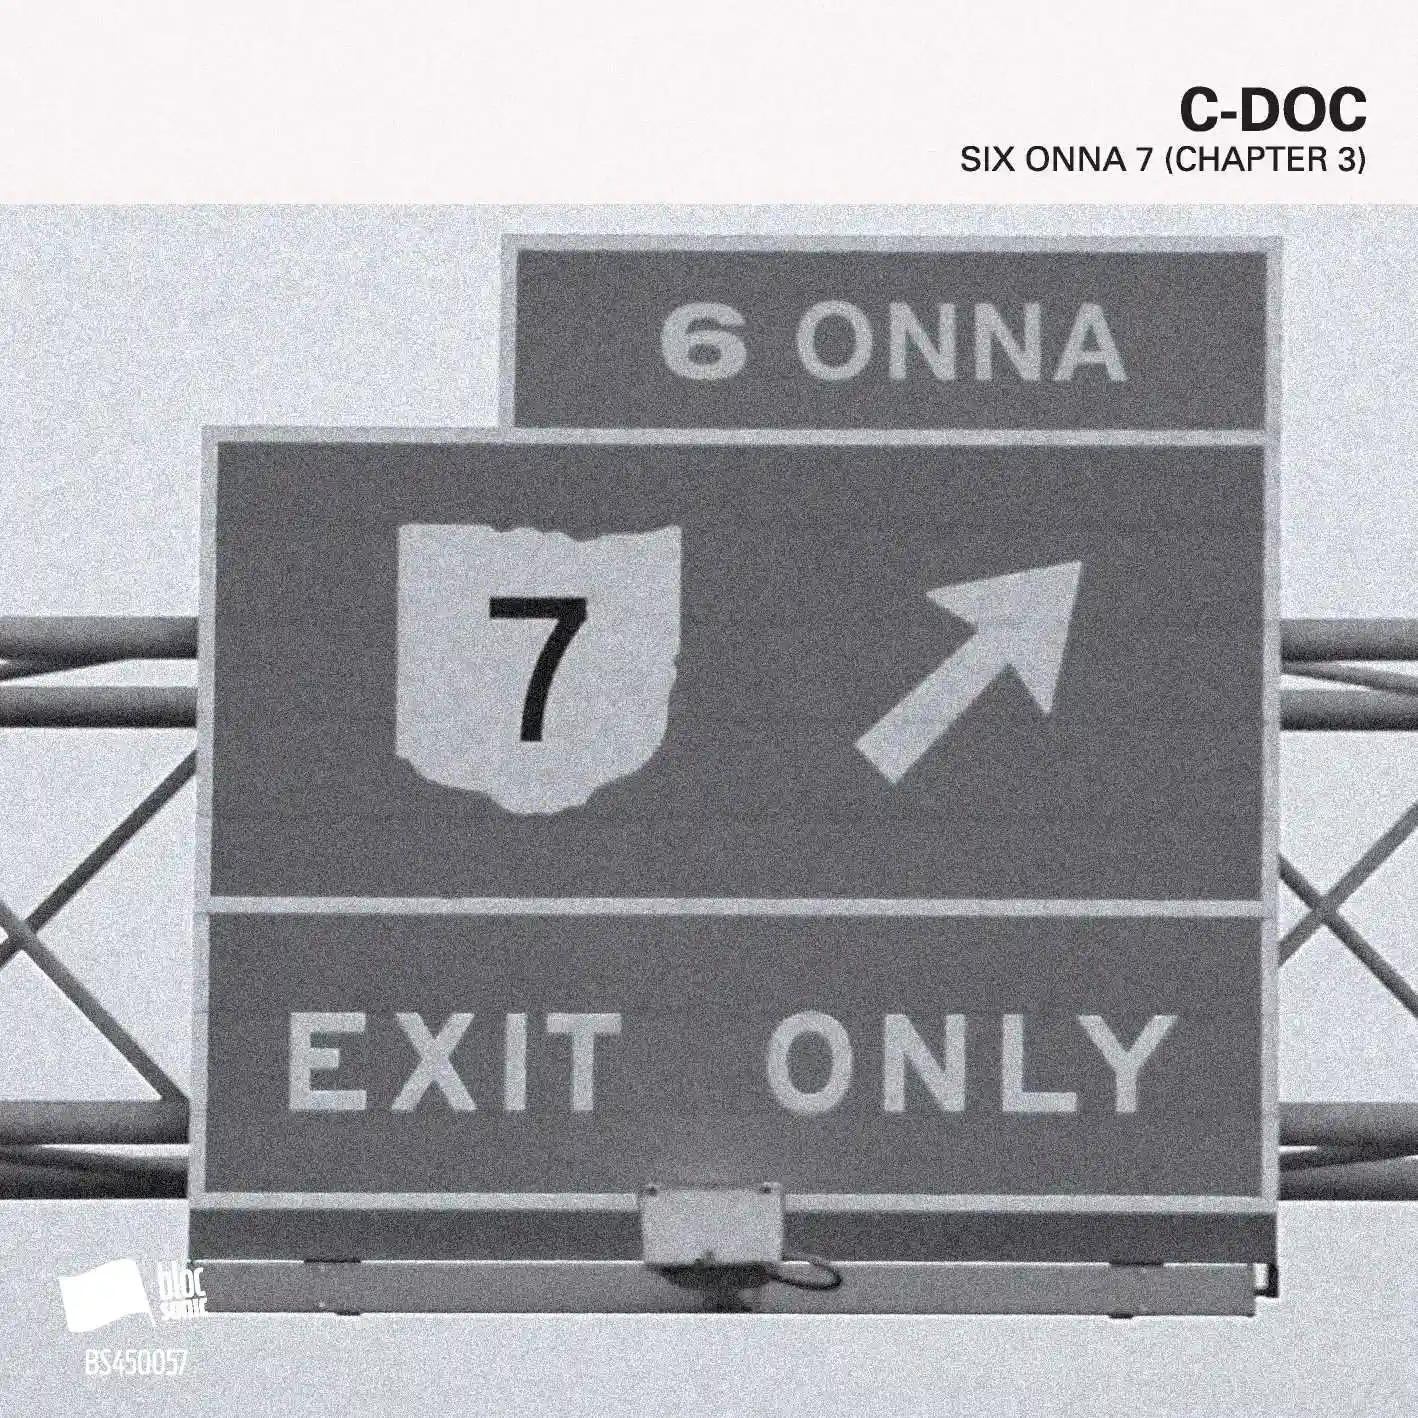 Album cover for “SIX ONNA 7 (Chapter 3)” by C-Doc